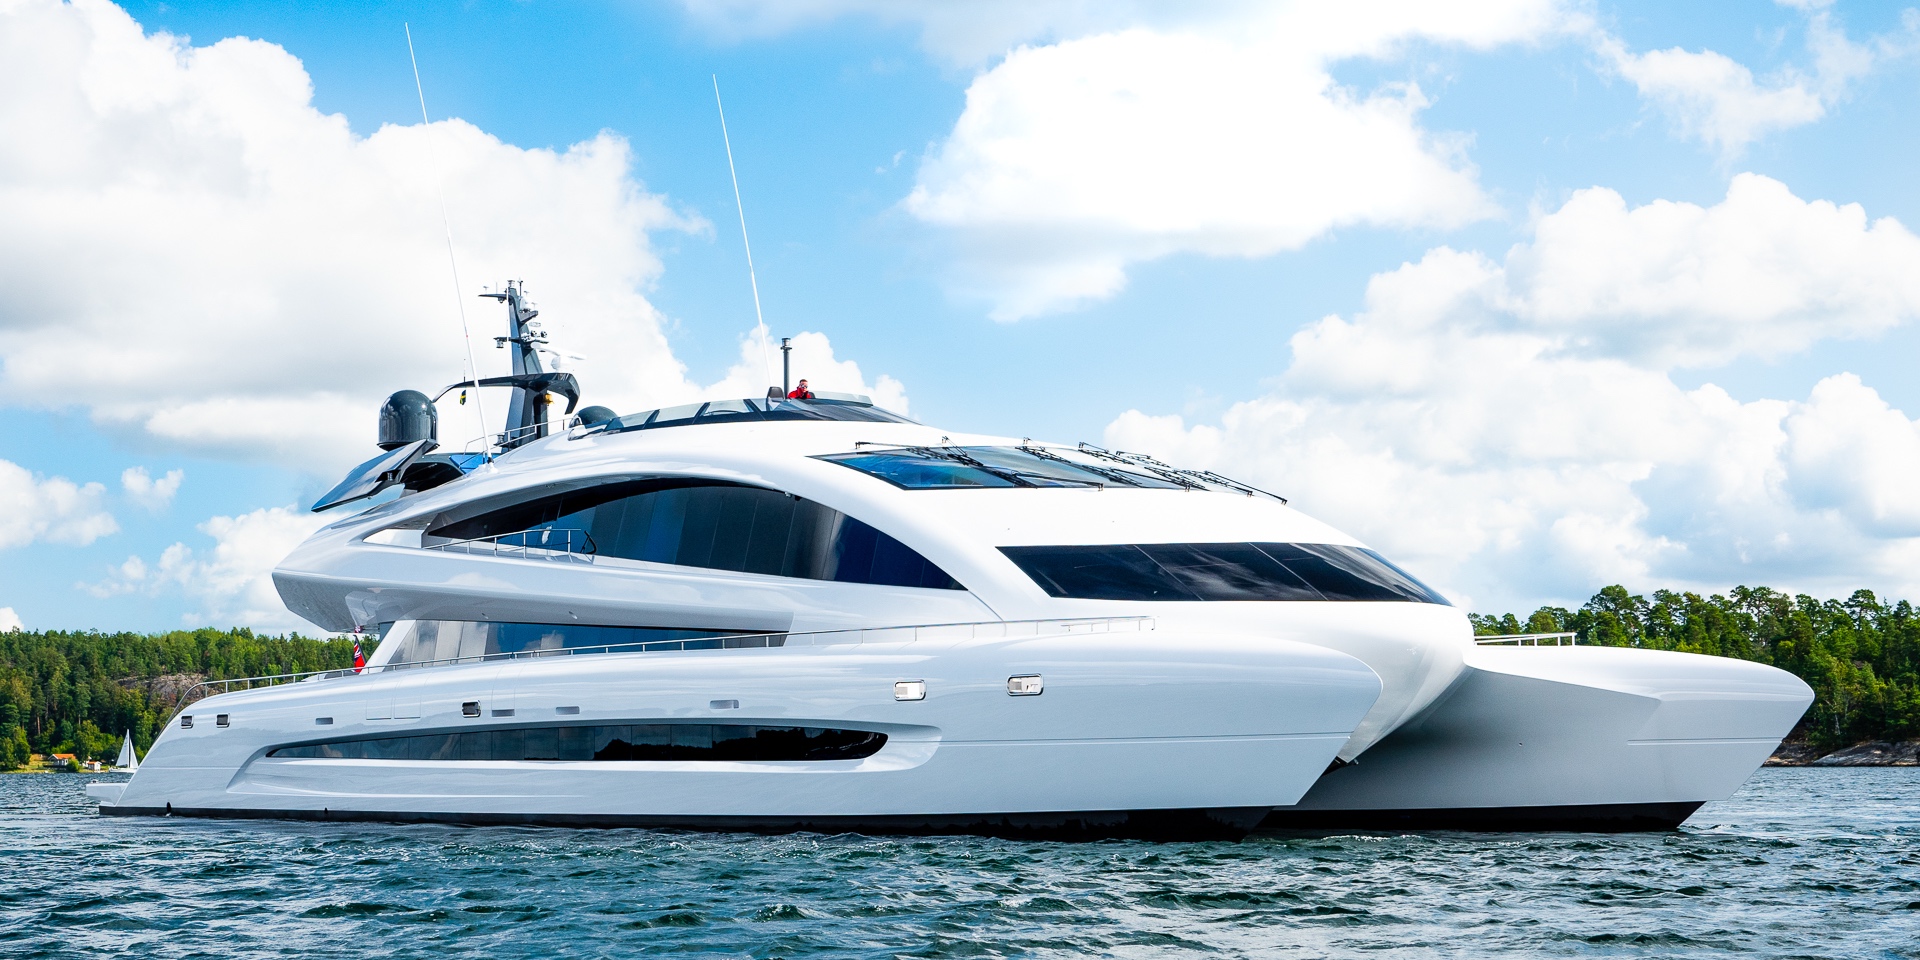 10 Years In The Making: Studio F.A. Porsche’s Superyacht Makes Its Water Debut